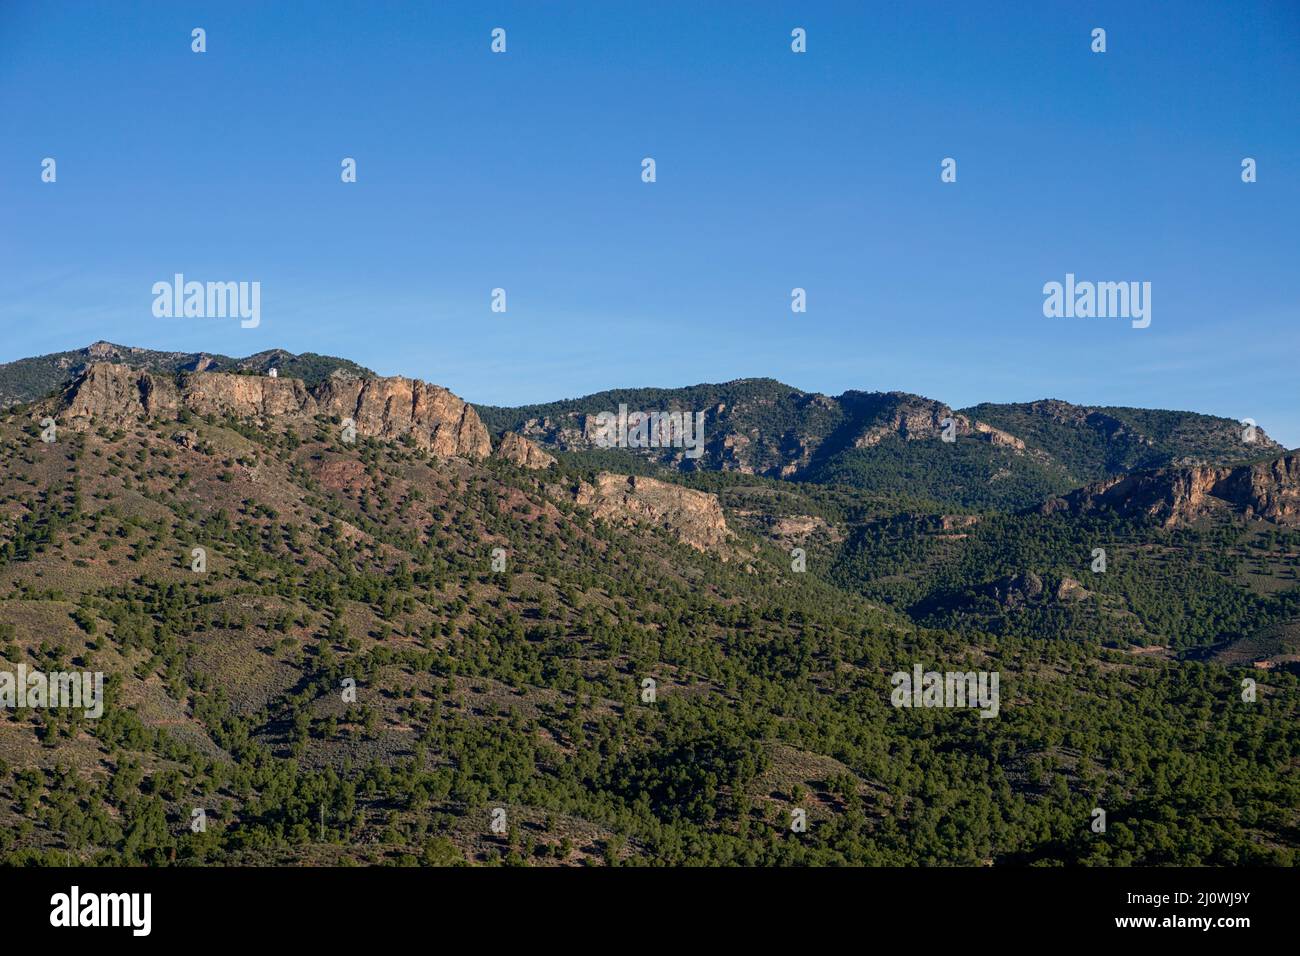 Landscape view of Spanish semi-desert with low green vegetation and mountains Stock Photo